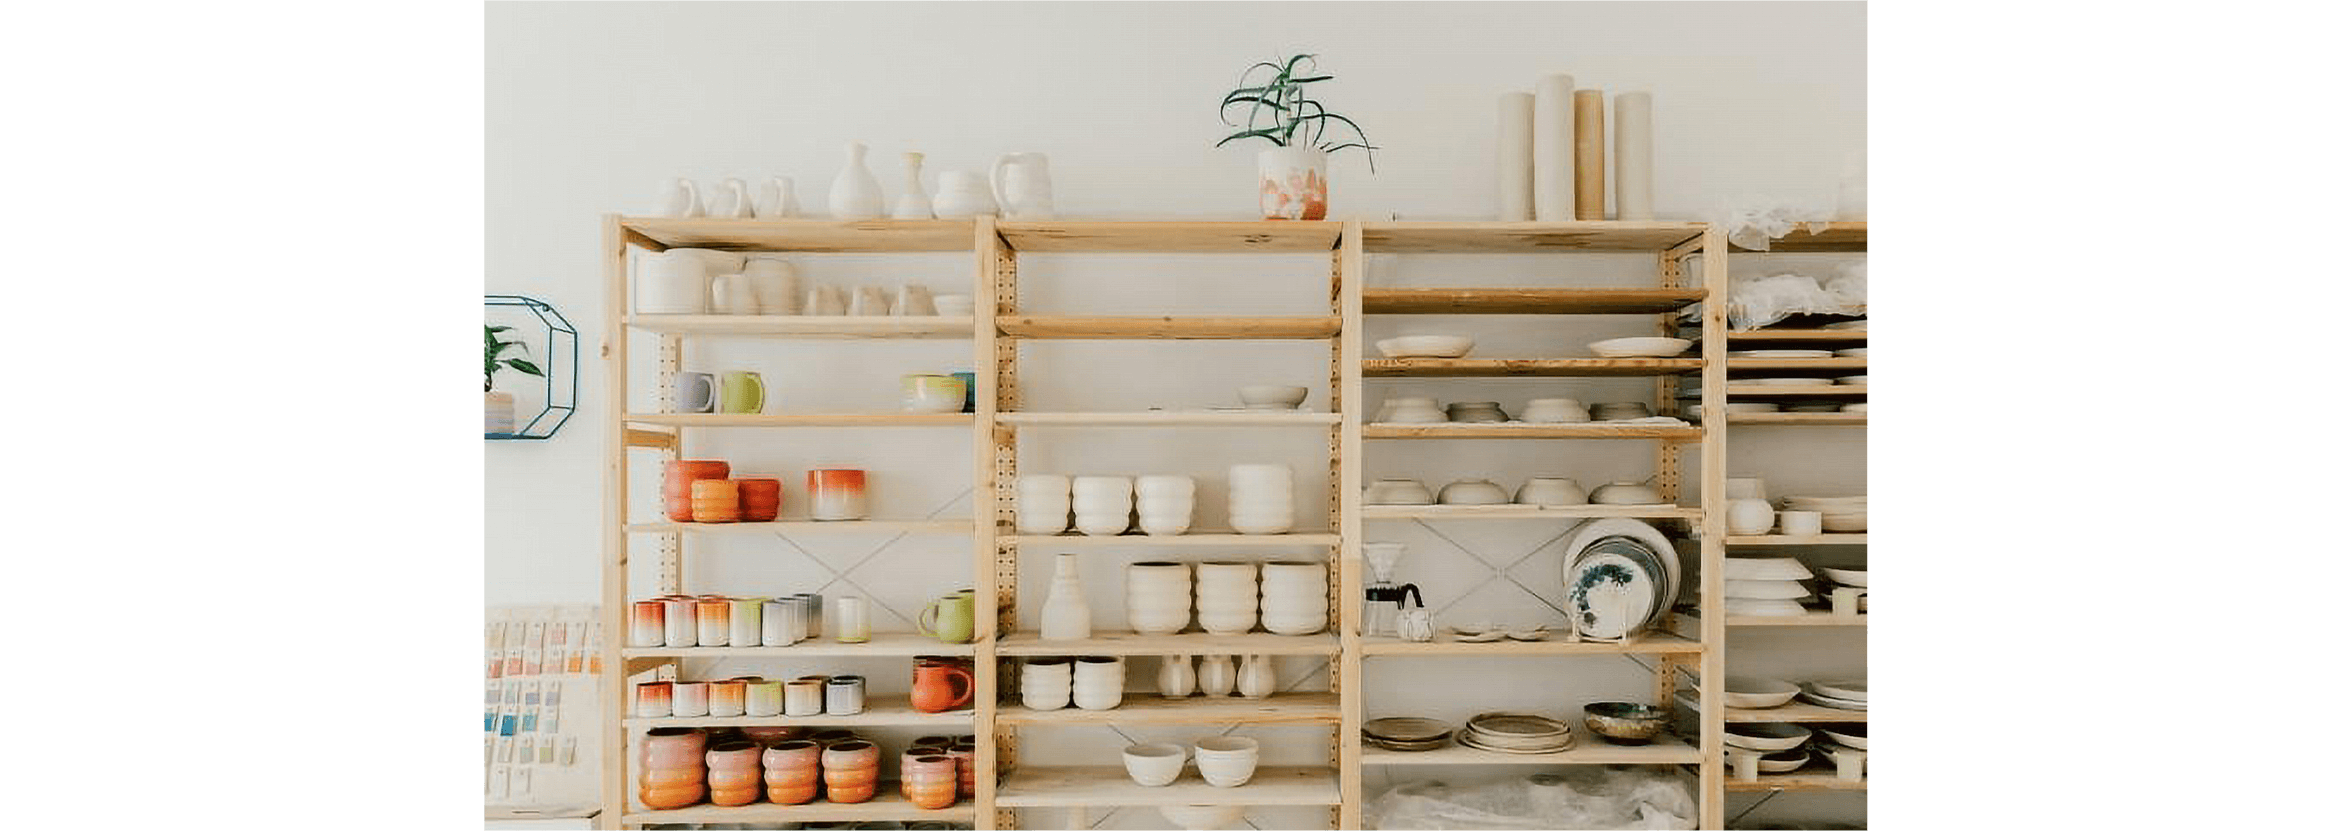 A set of shelves lined with mugs, plates and other crockery.